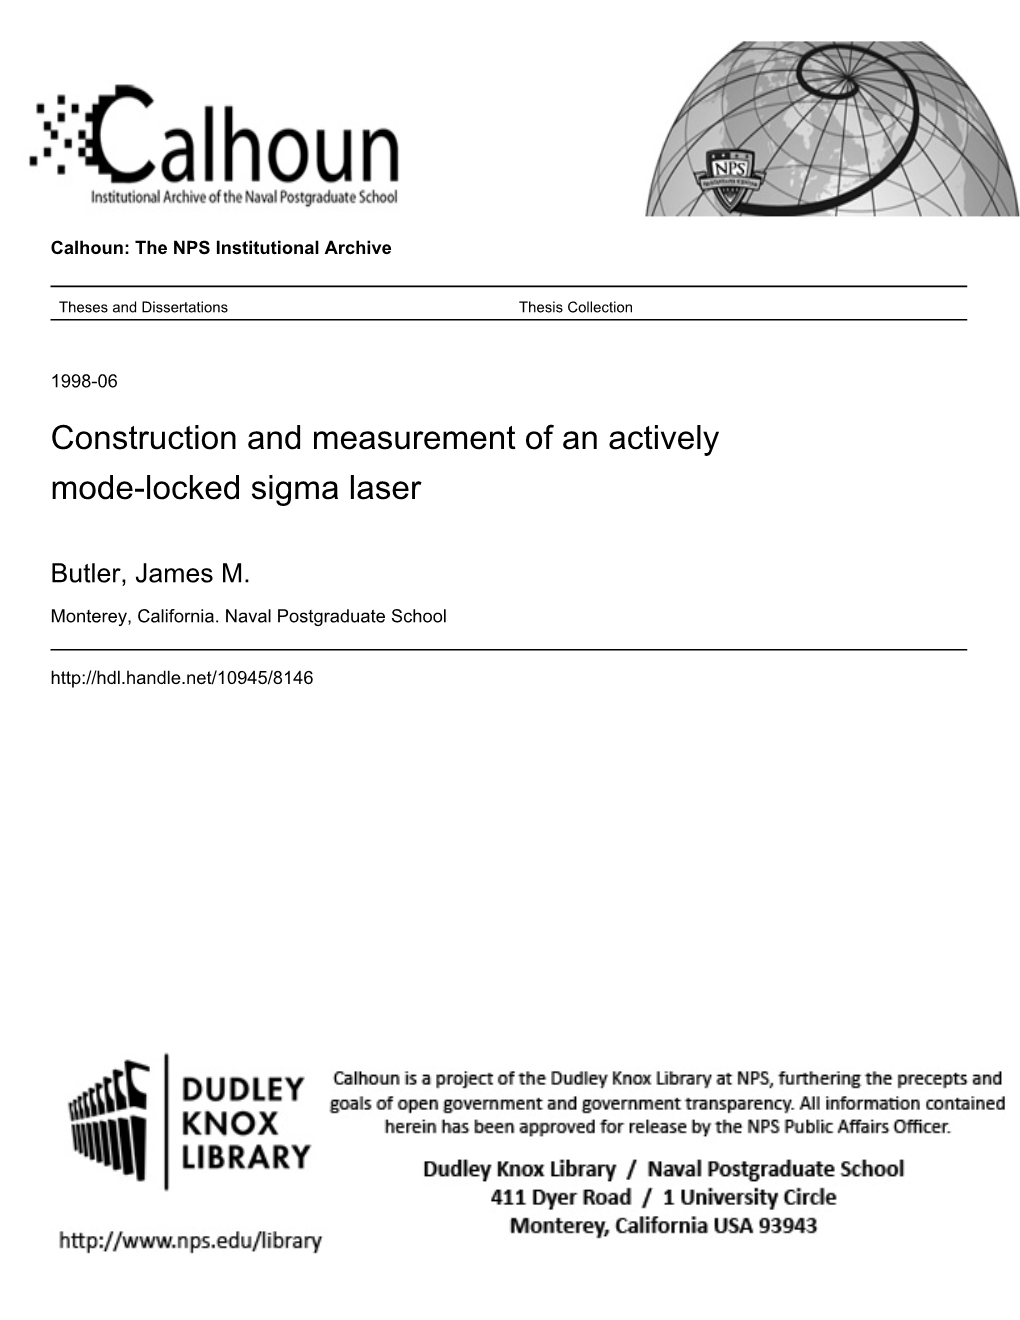 Construction and Measurement of an Actively Mode-Locked Sigma Laser